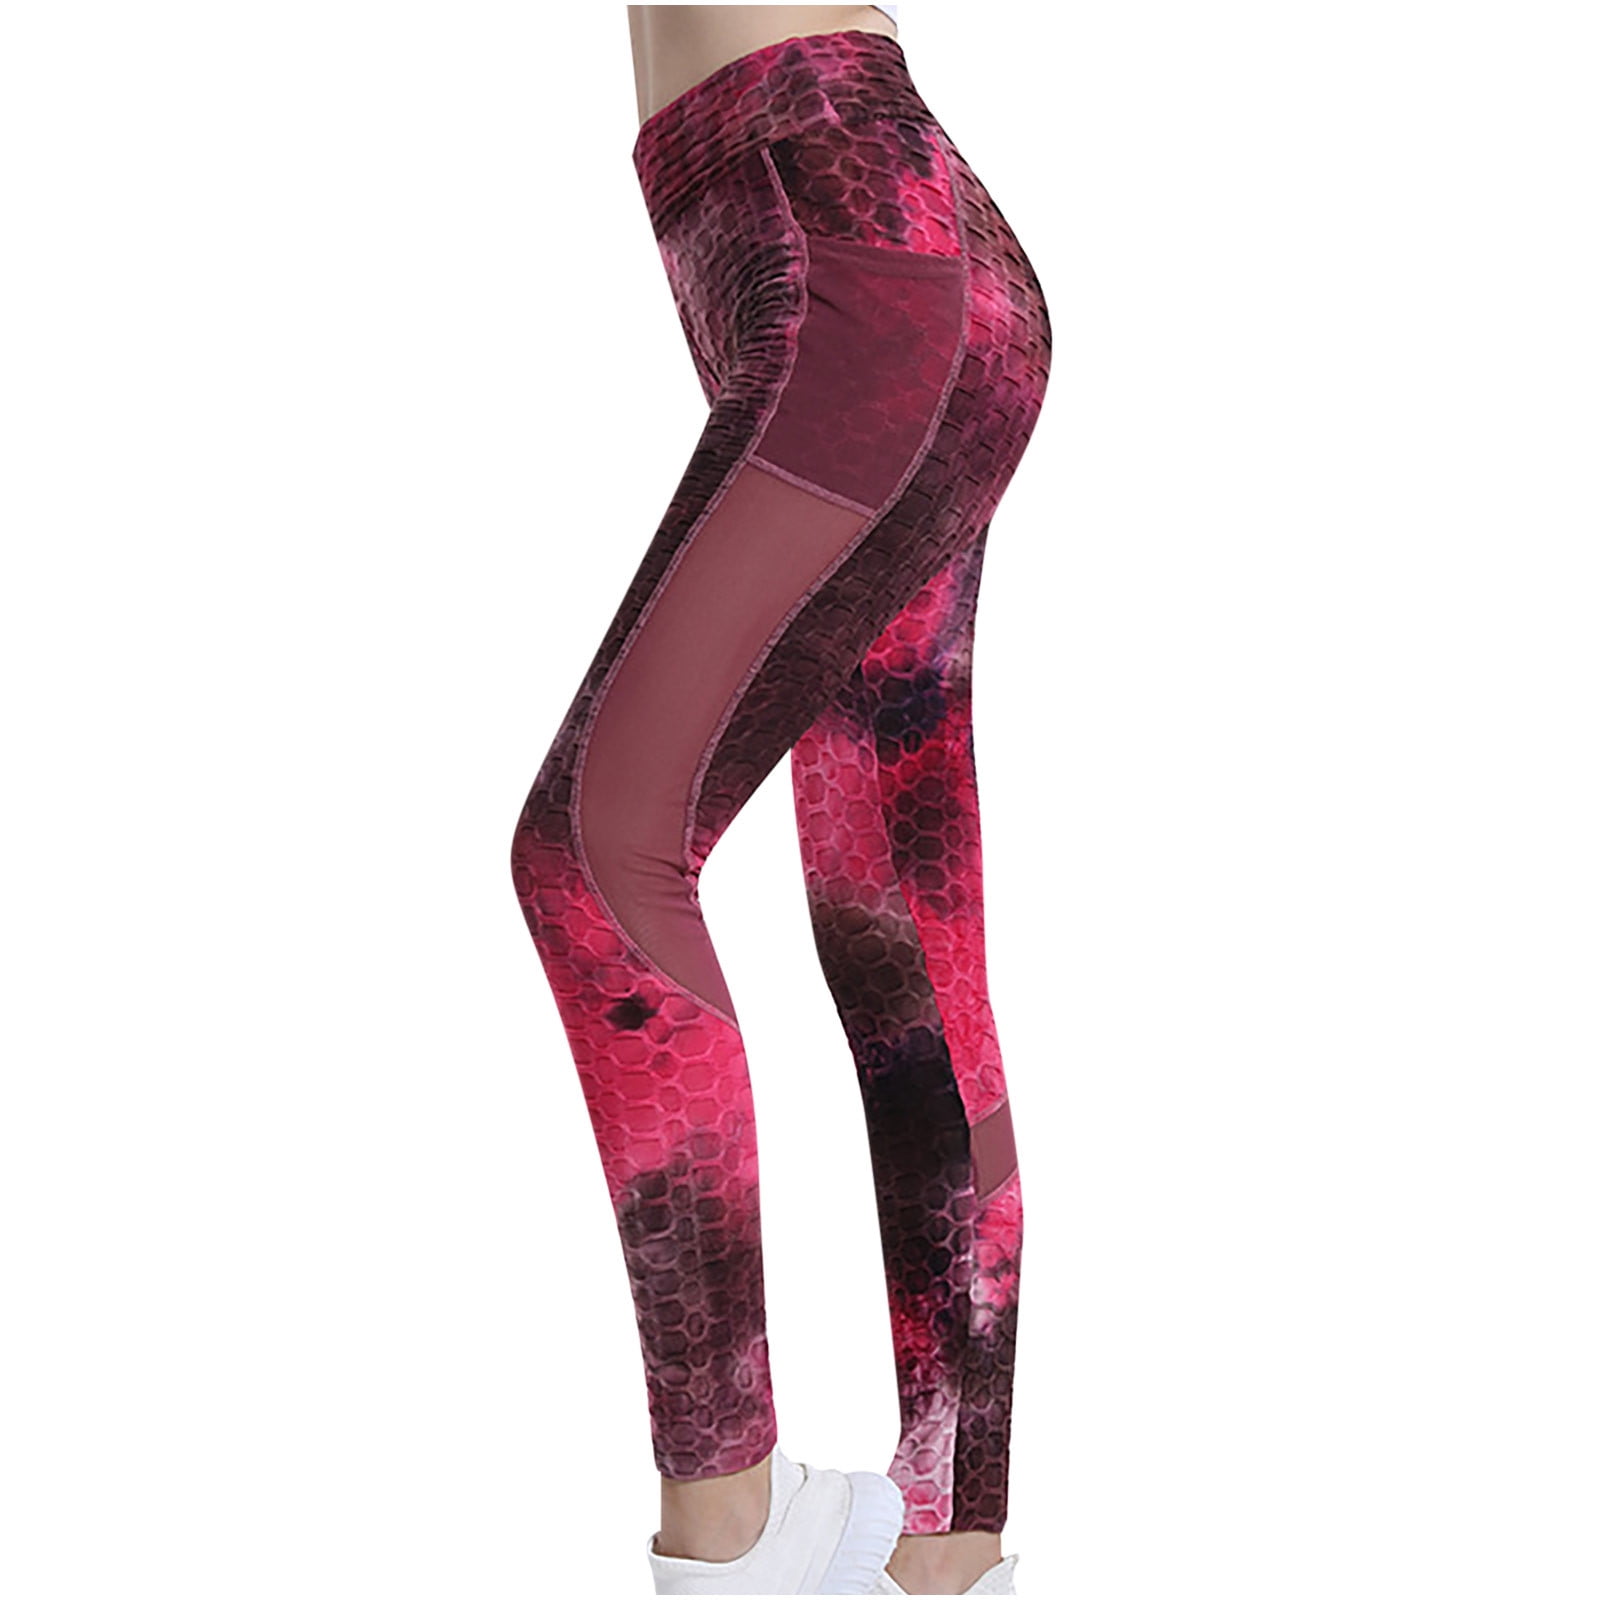 Women's Mesh Panel Yoga Leggings with Side Pockets Workout Running High ...